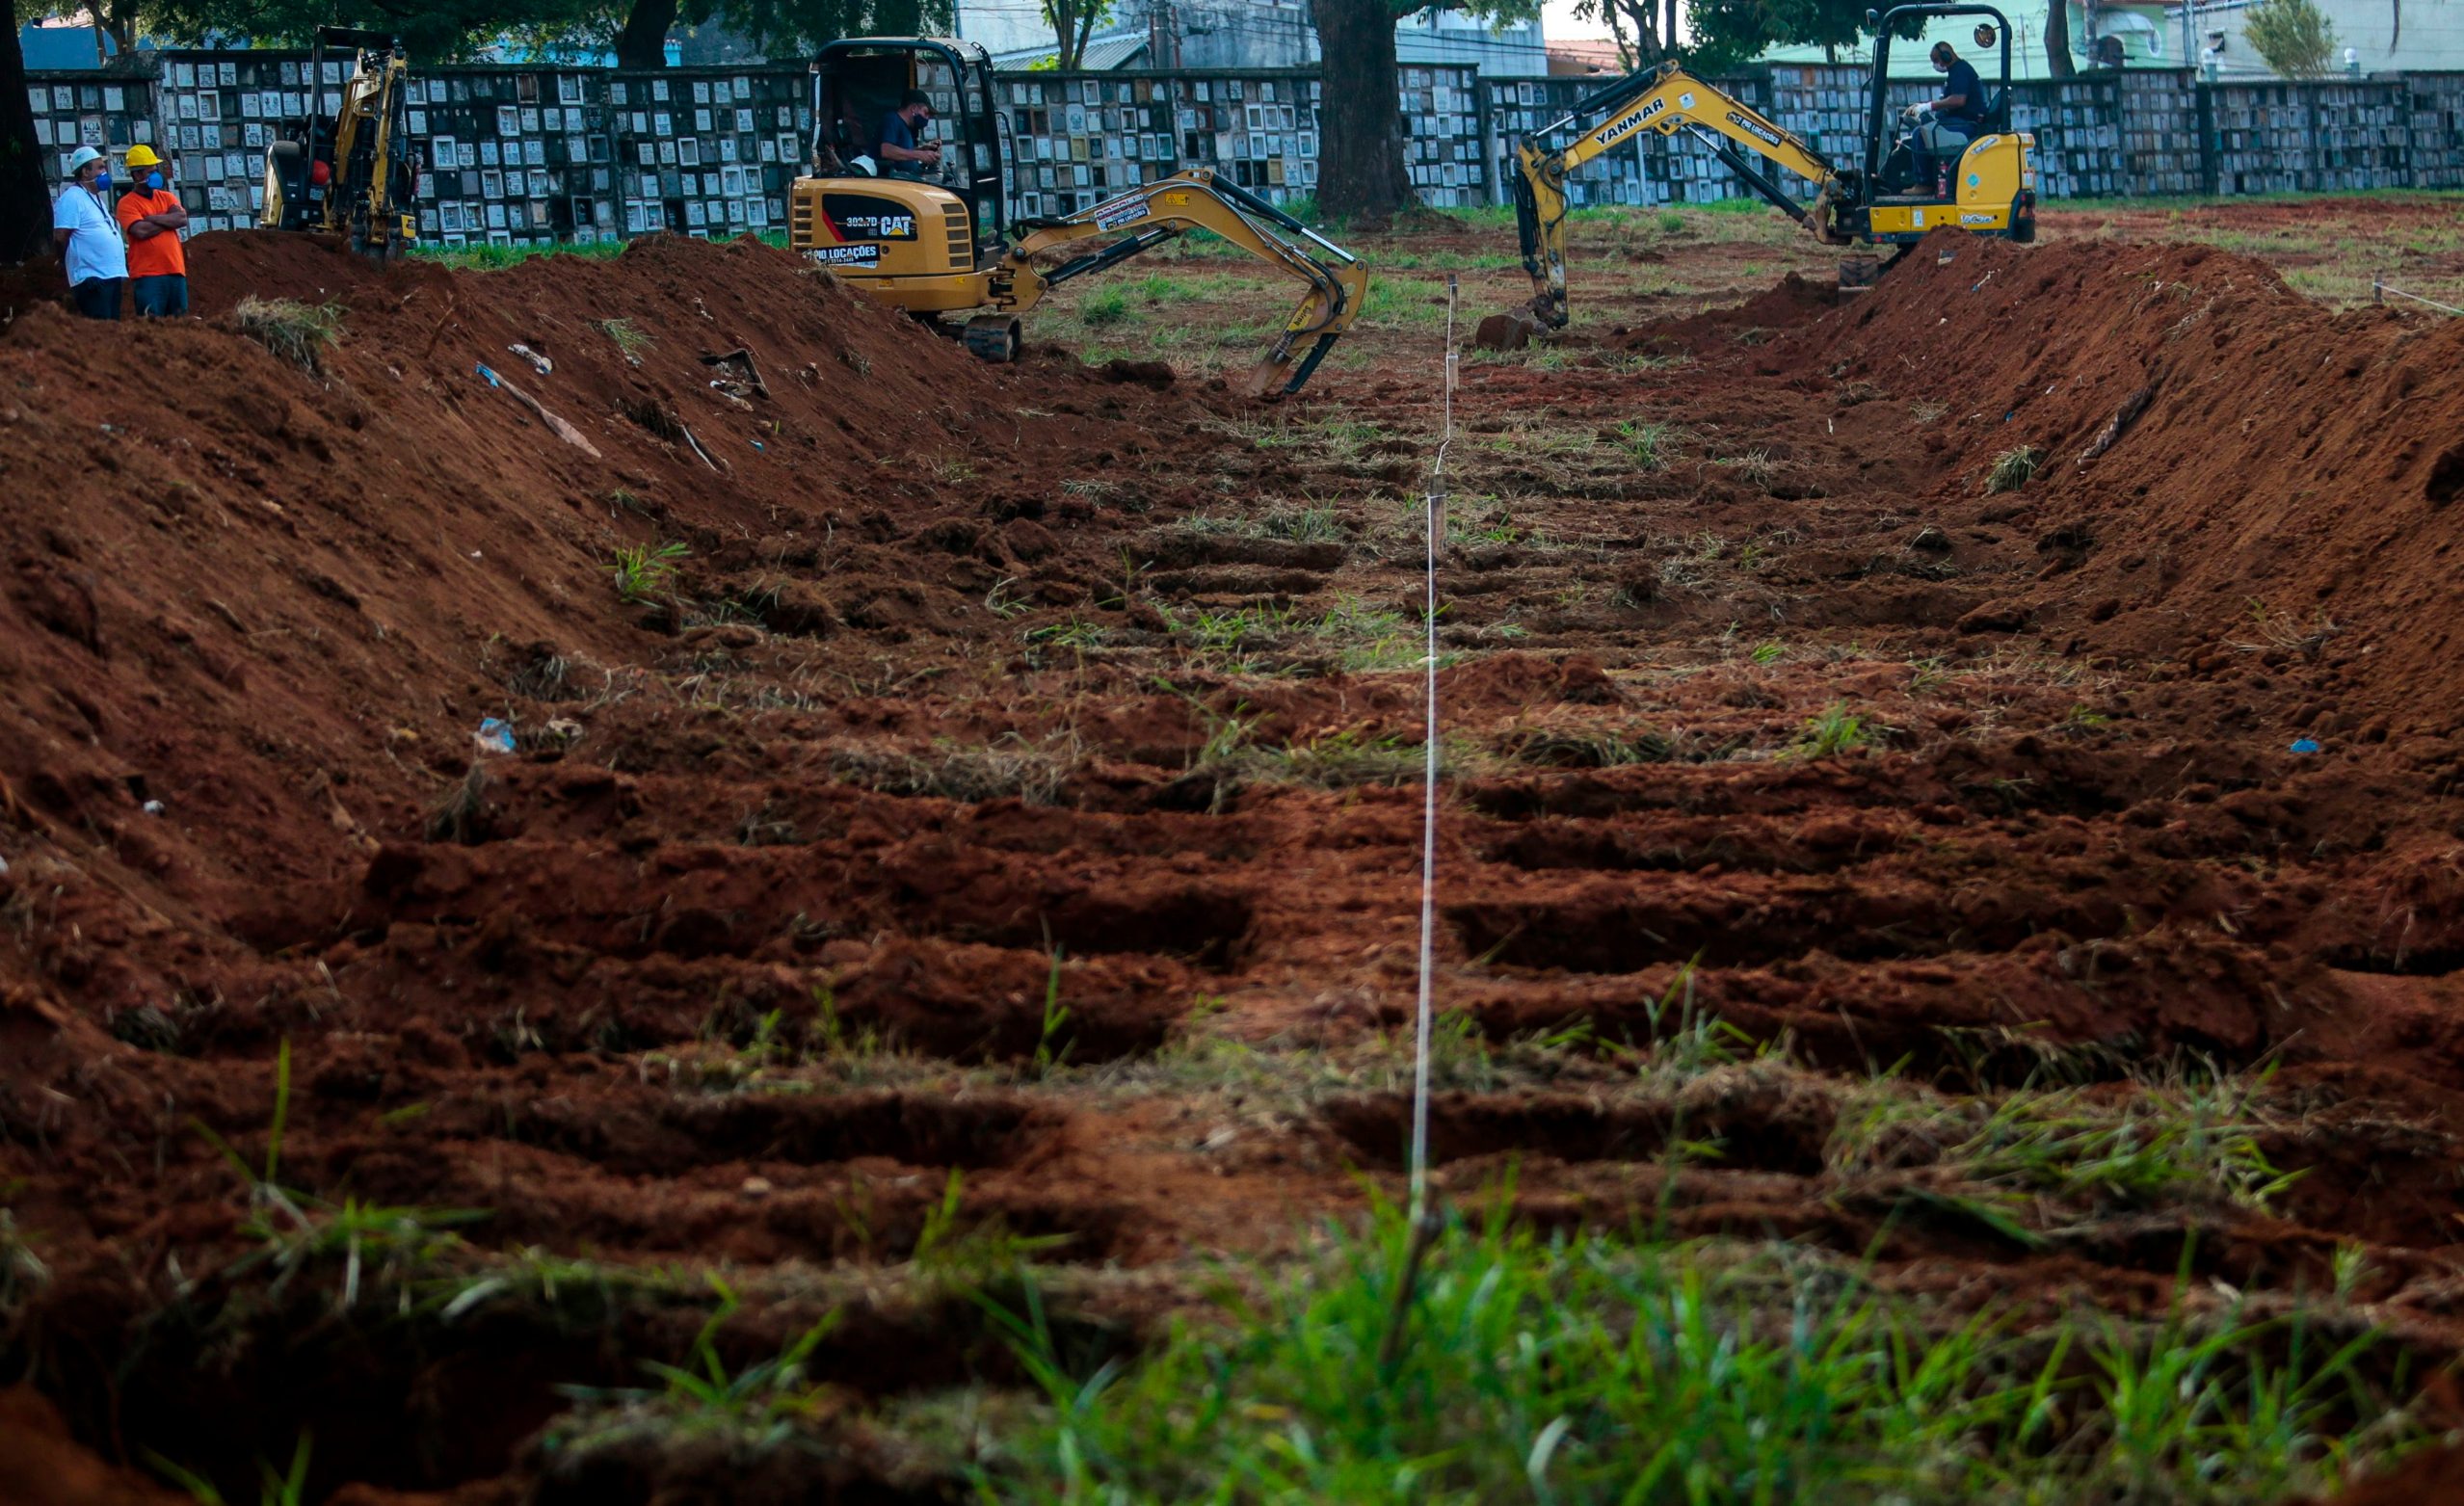 Workers dig graves in the Vila Formosa cemetery, due to an expected increase in deaths within the COVID-19 coronavirus pandemic, in the city of Sao Paulo, Brazil, 21 April 2020. (Photo by Miguel SCHINCARIOL / AFP)